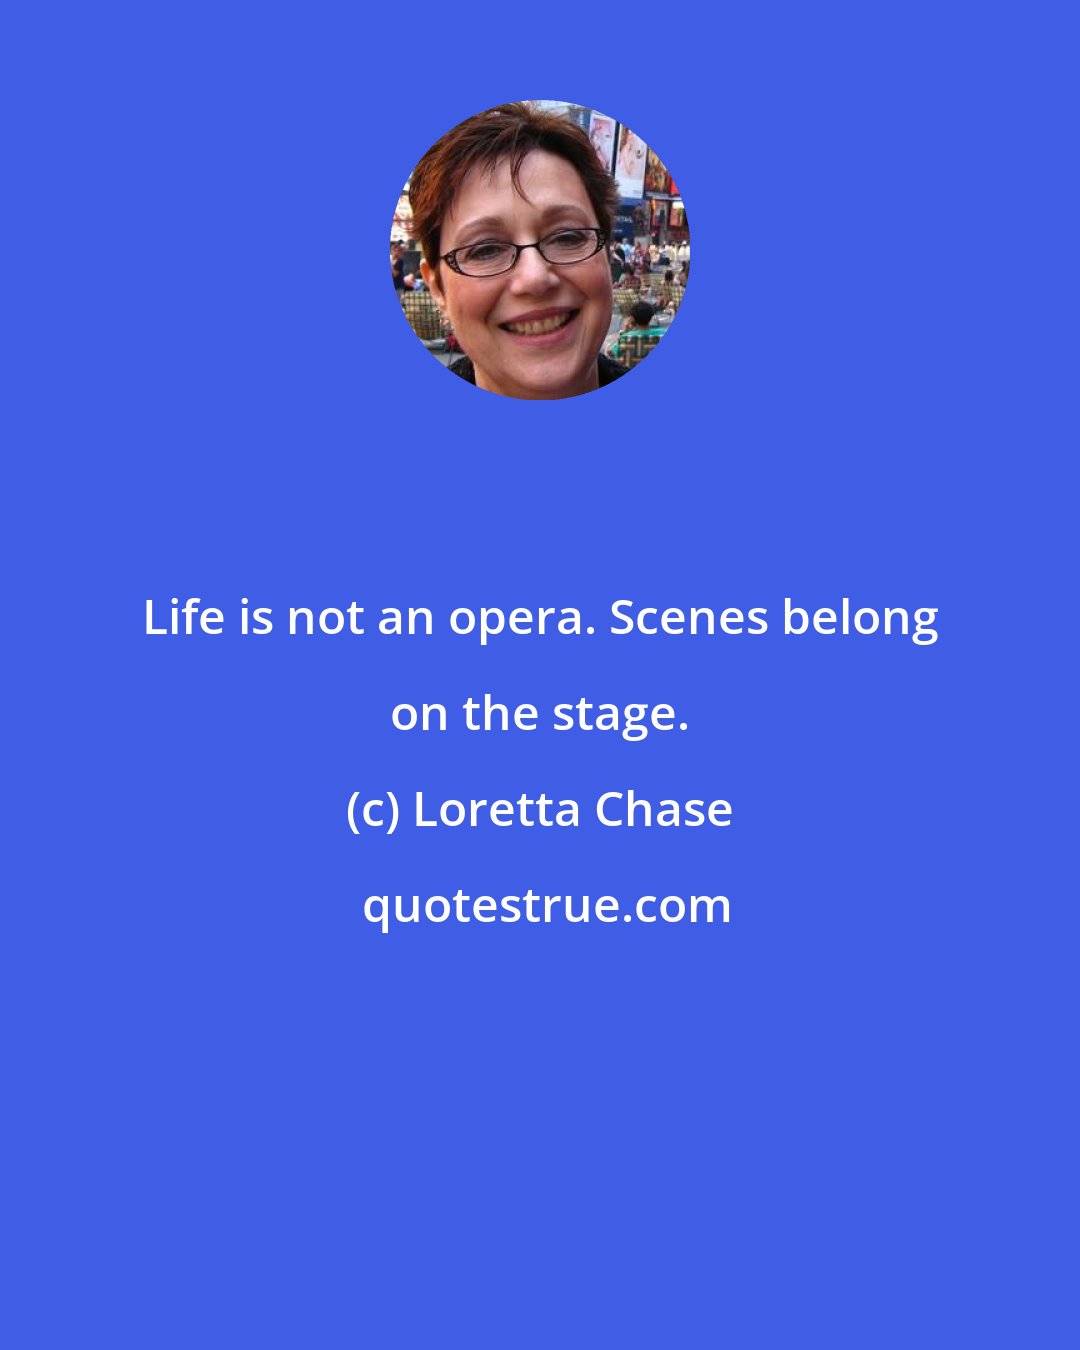 Loretta Chase: Life is not an opera. Scenes belong on the stage.